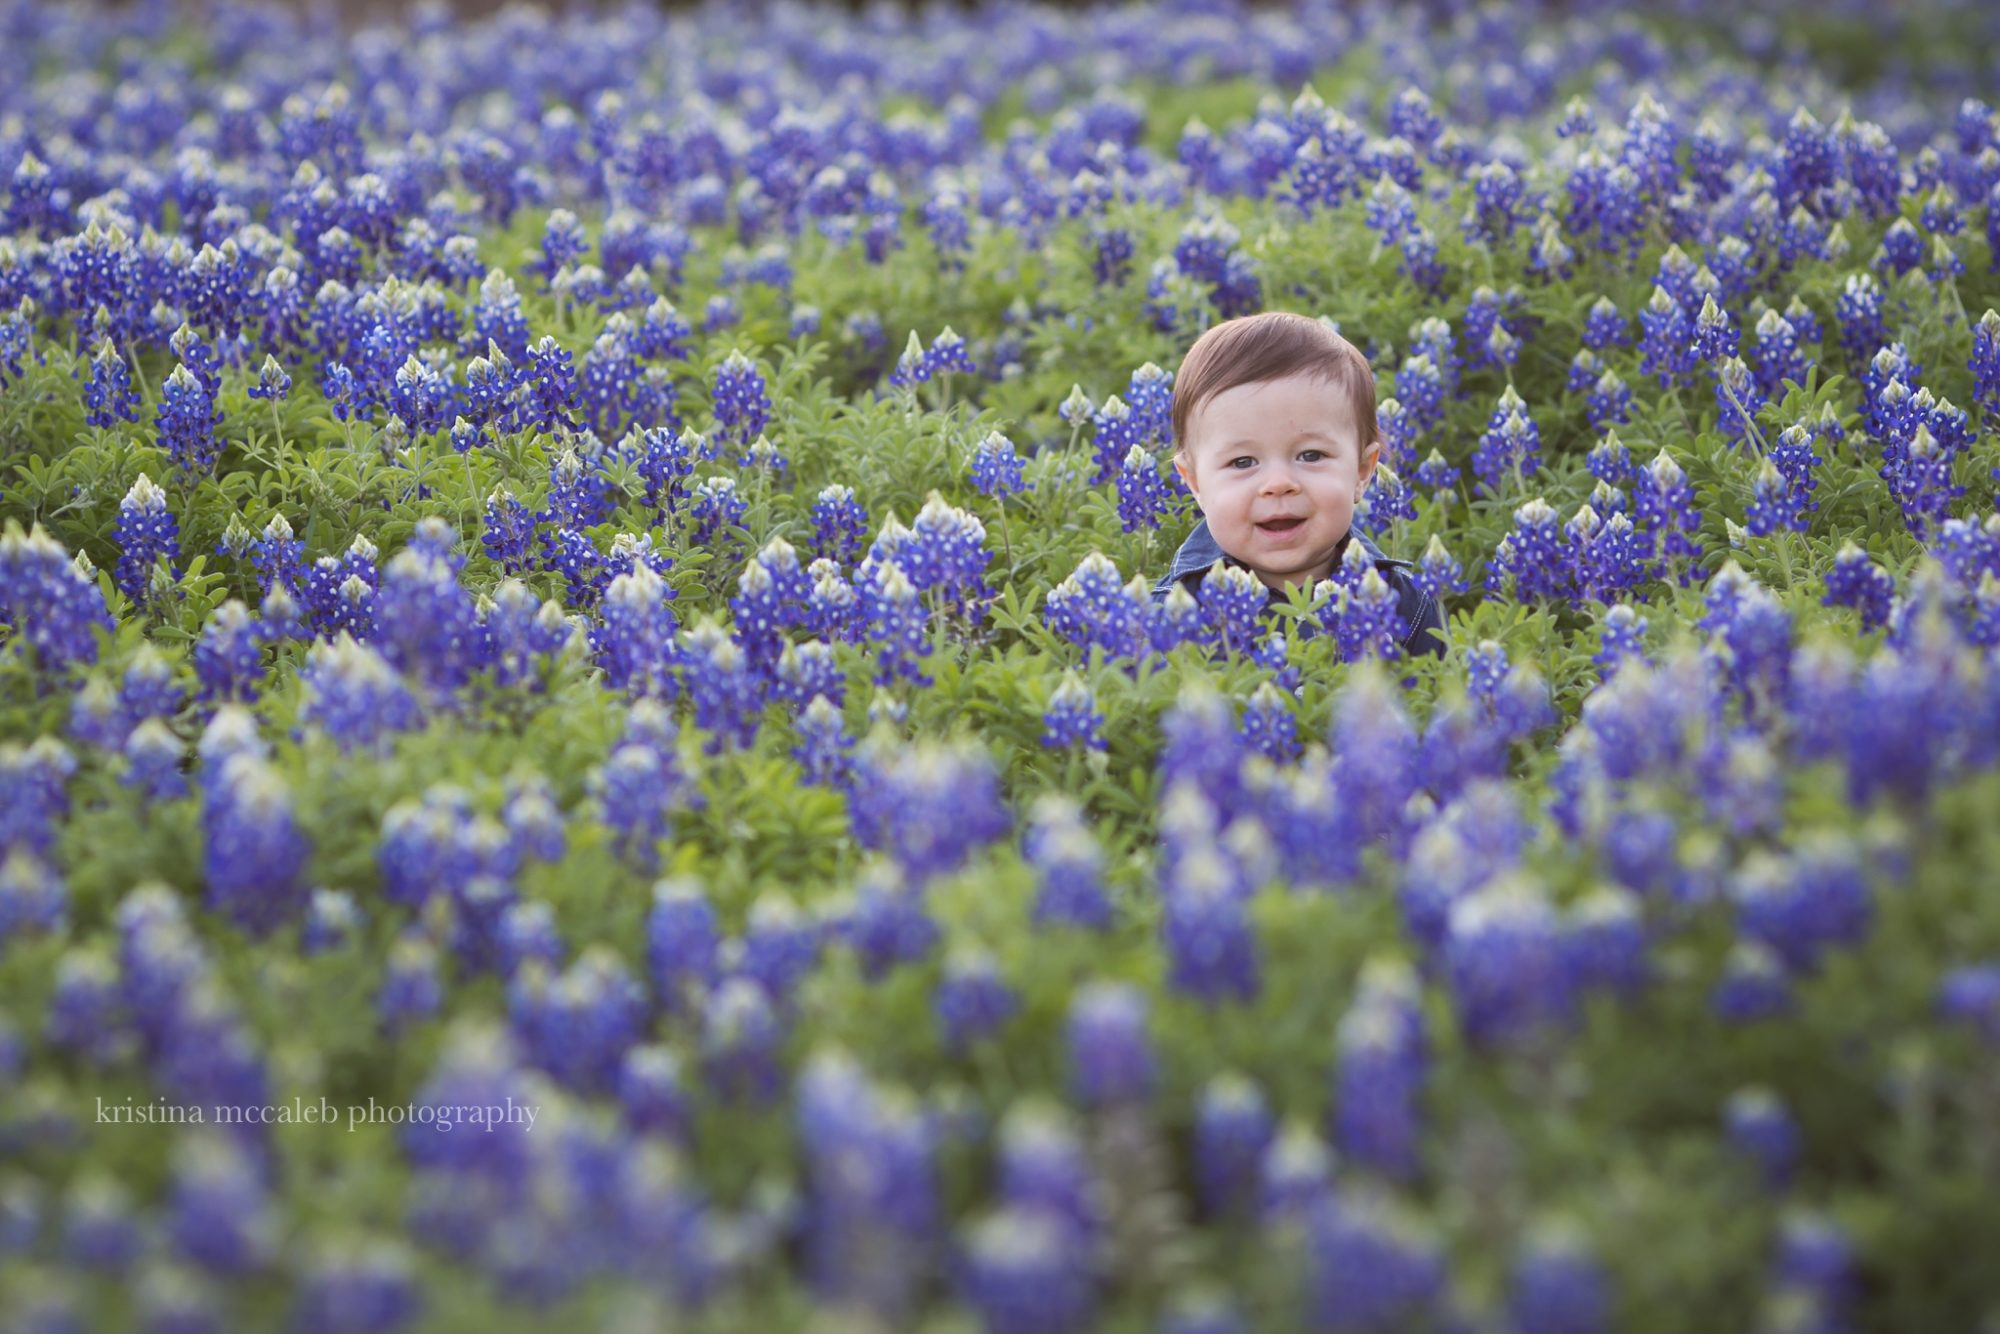 Why we Love Bluebonnets in Texas